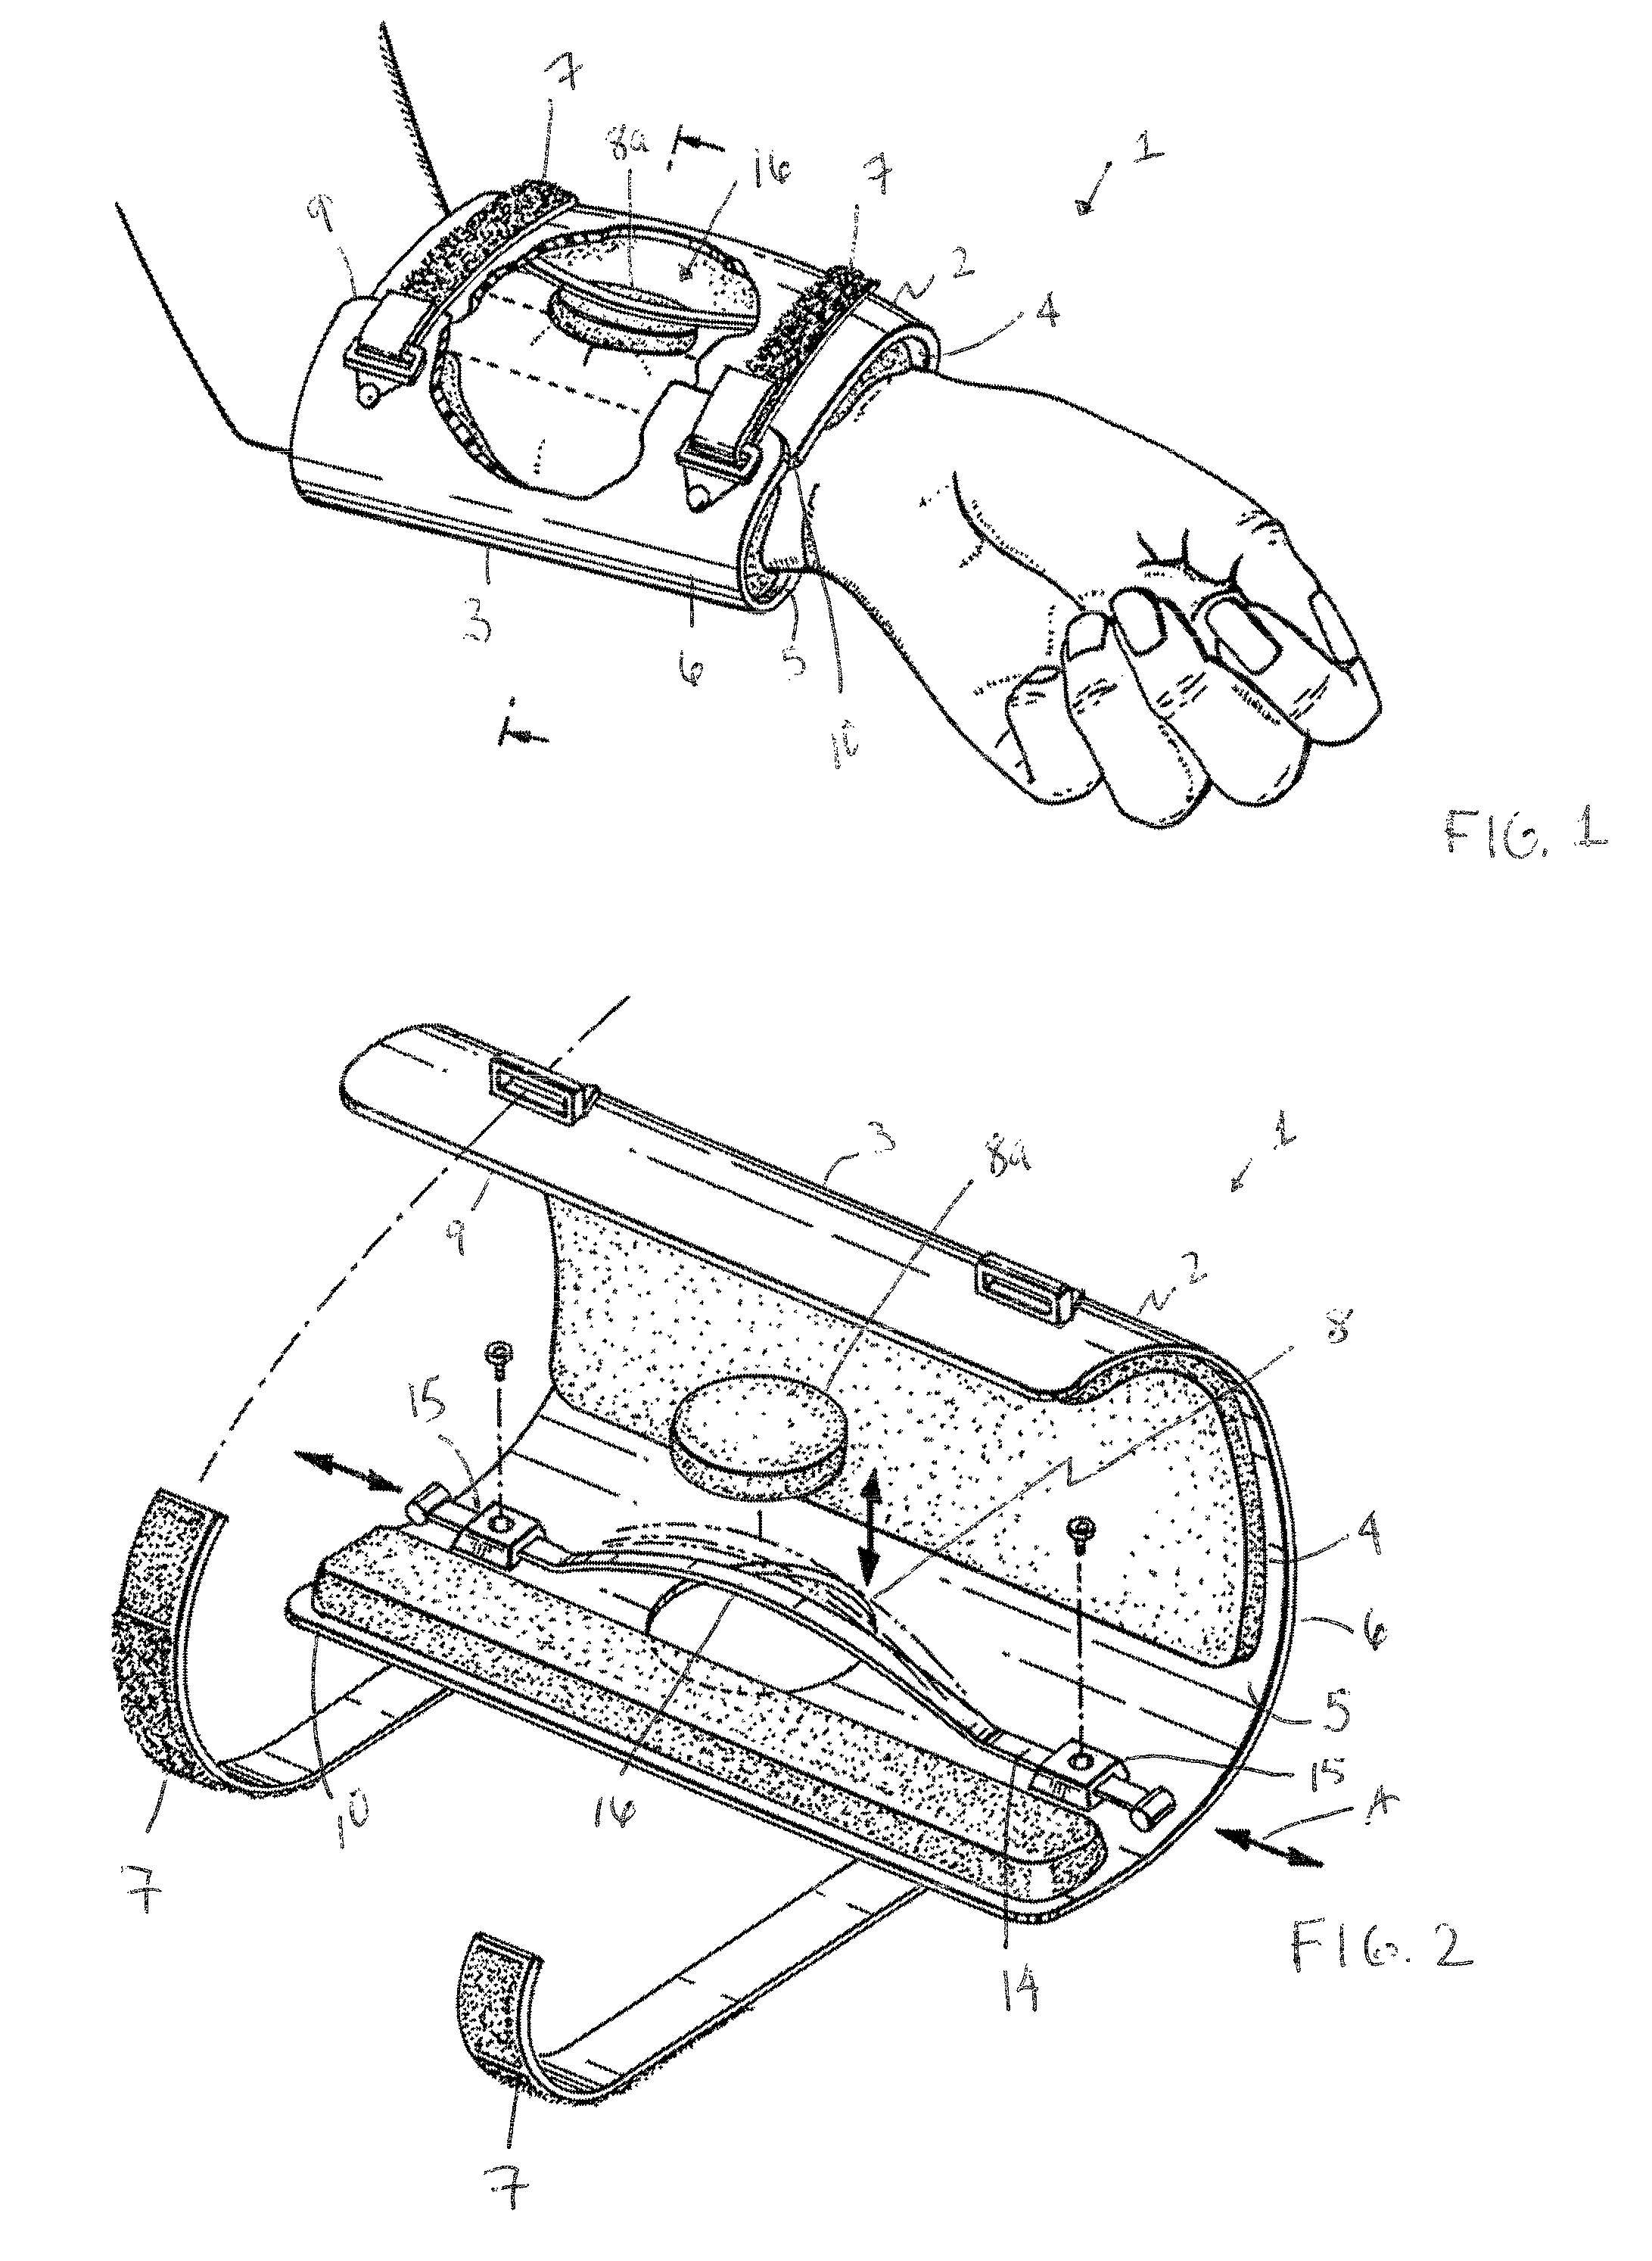 Orthopaedic device and method of use for treating bone fractures